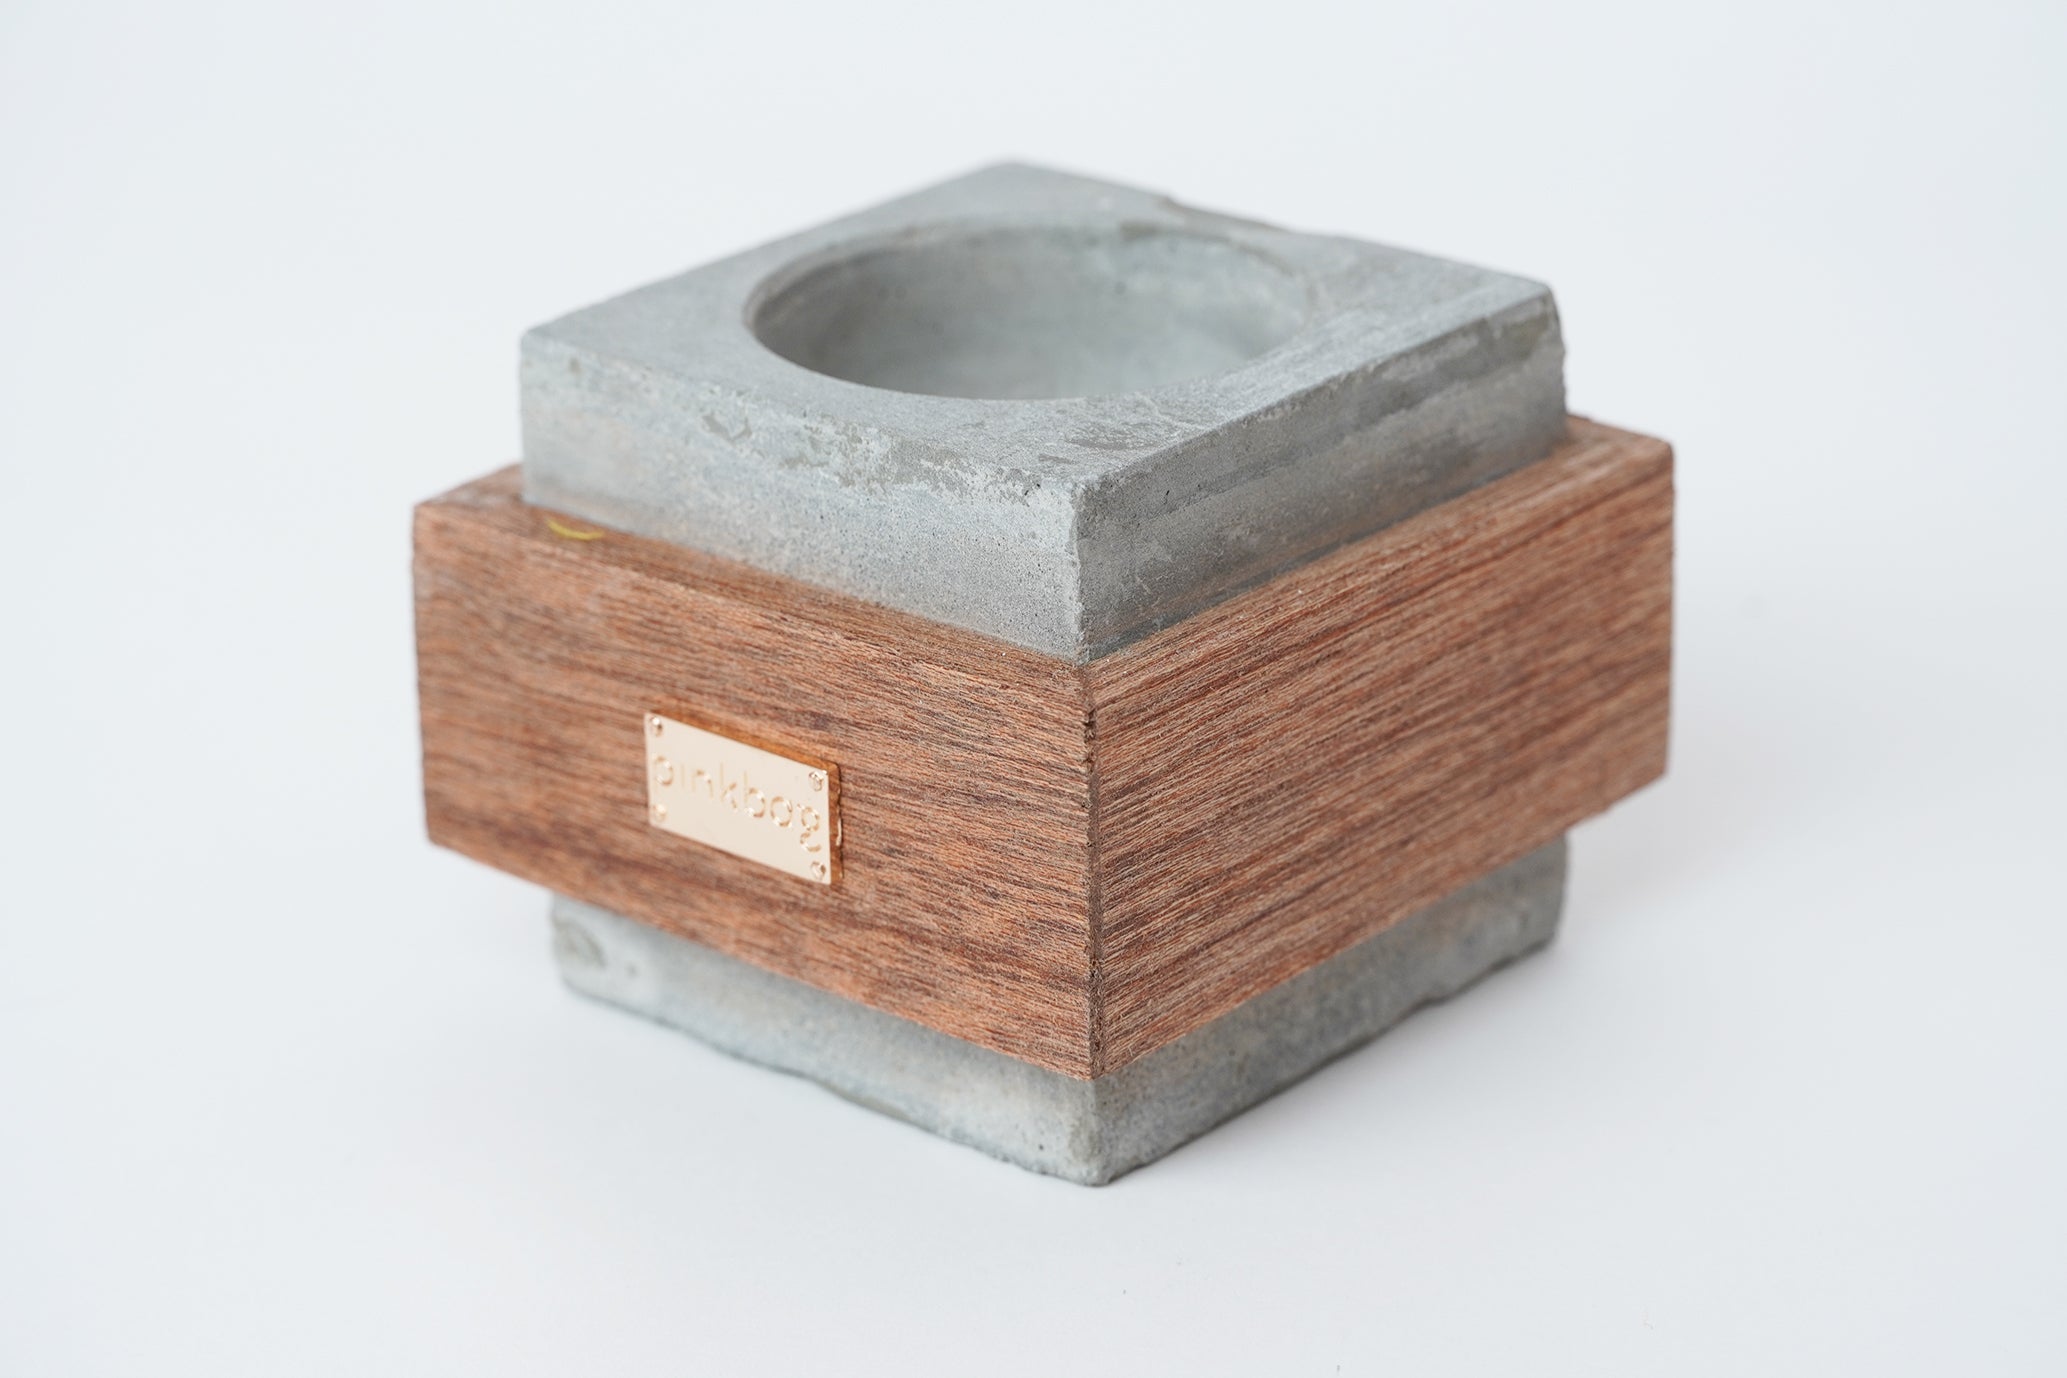 concreted and wood ring mubkar